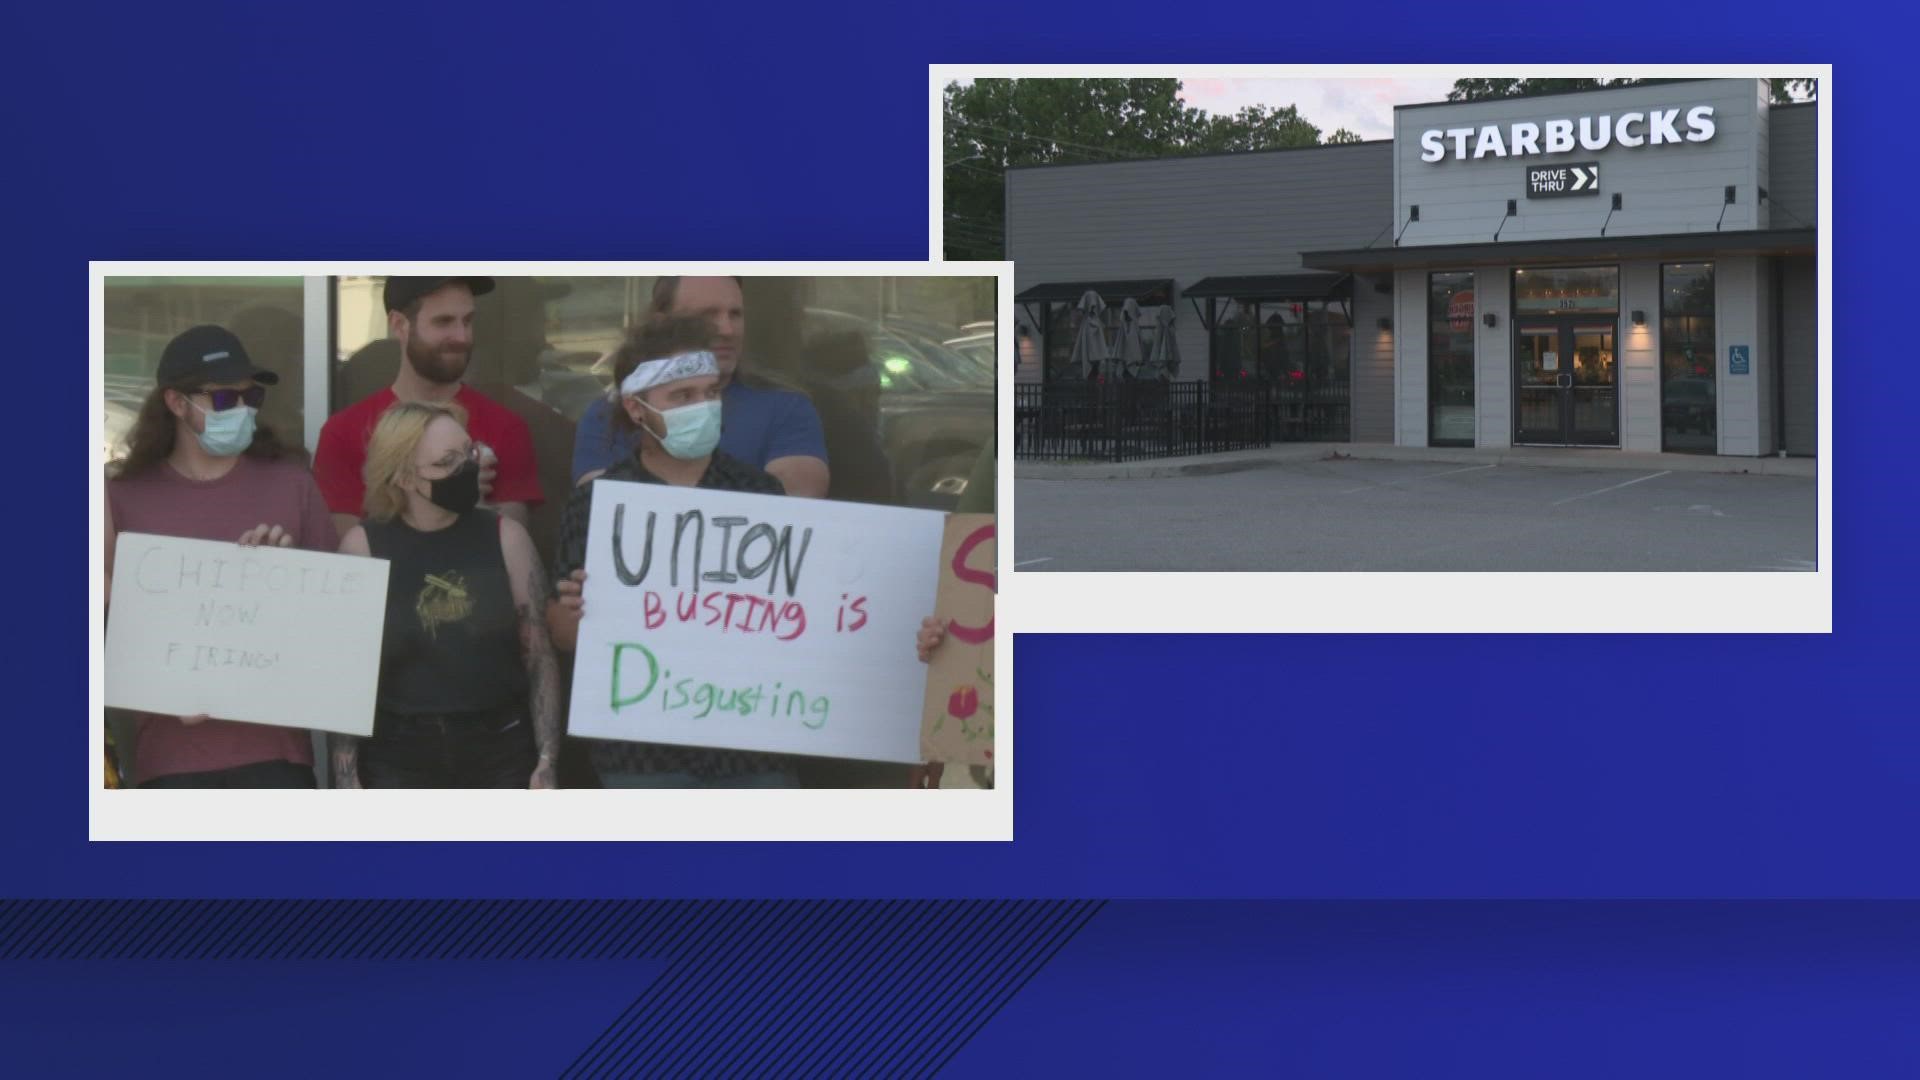 The Augusta Chipotle has been closed since June 17. Biddeford Starbucks employees voted 9-3 to unionize on July 14.